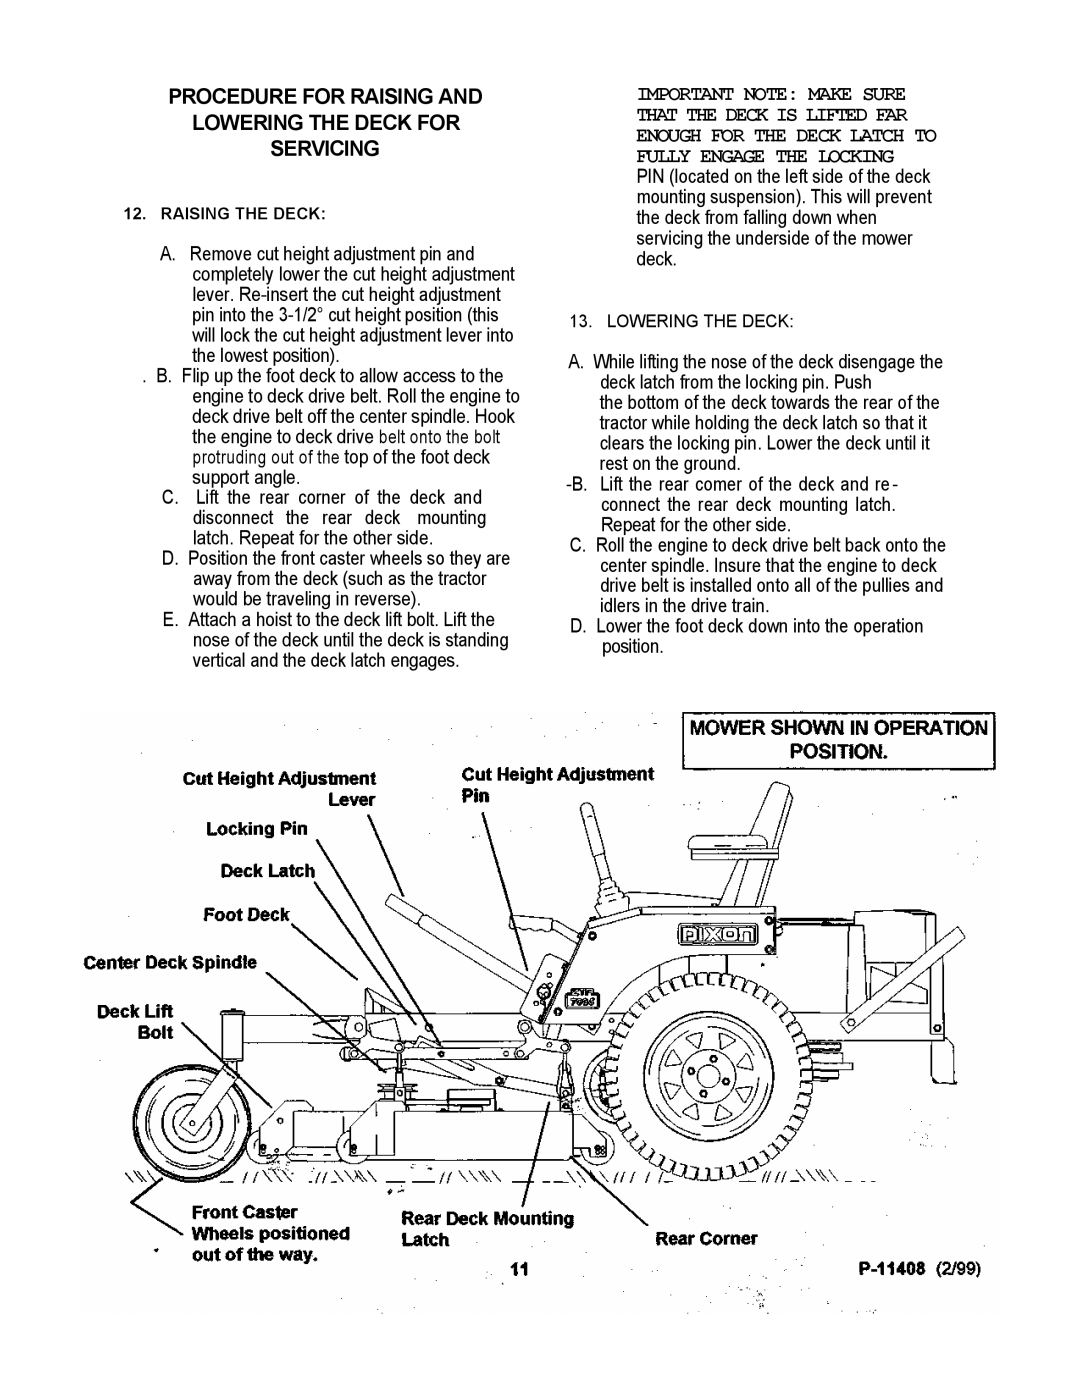 Dixon 700 Series manual the lowest position 